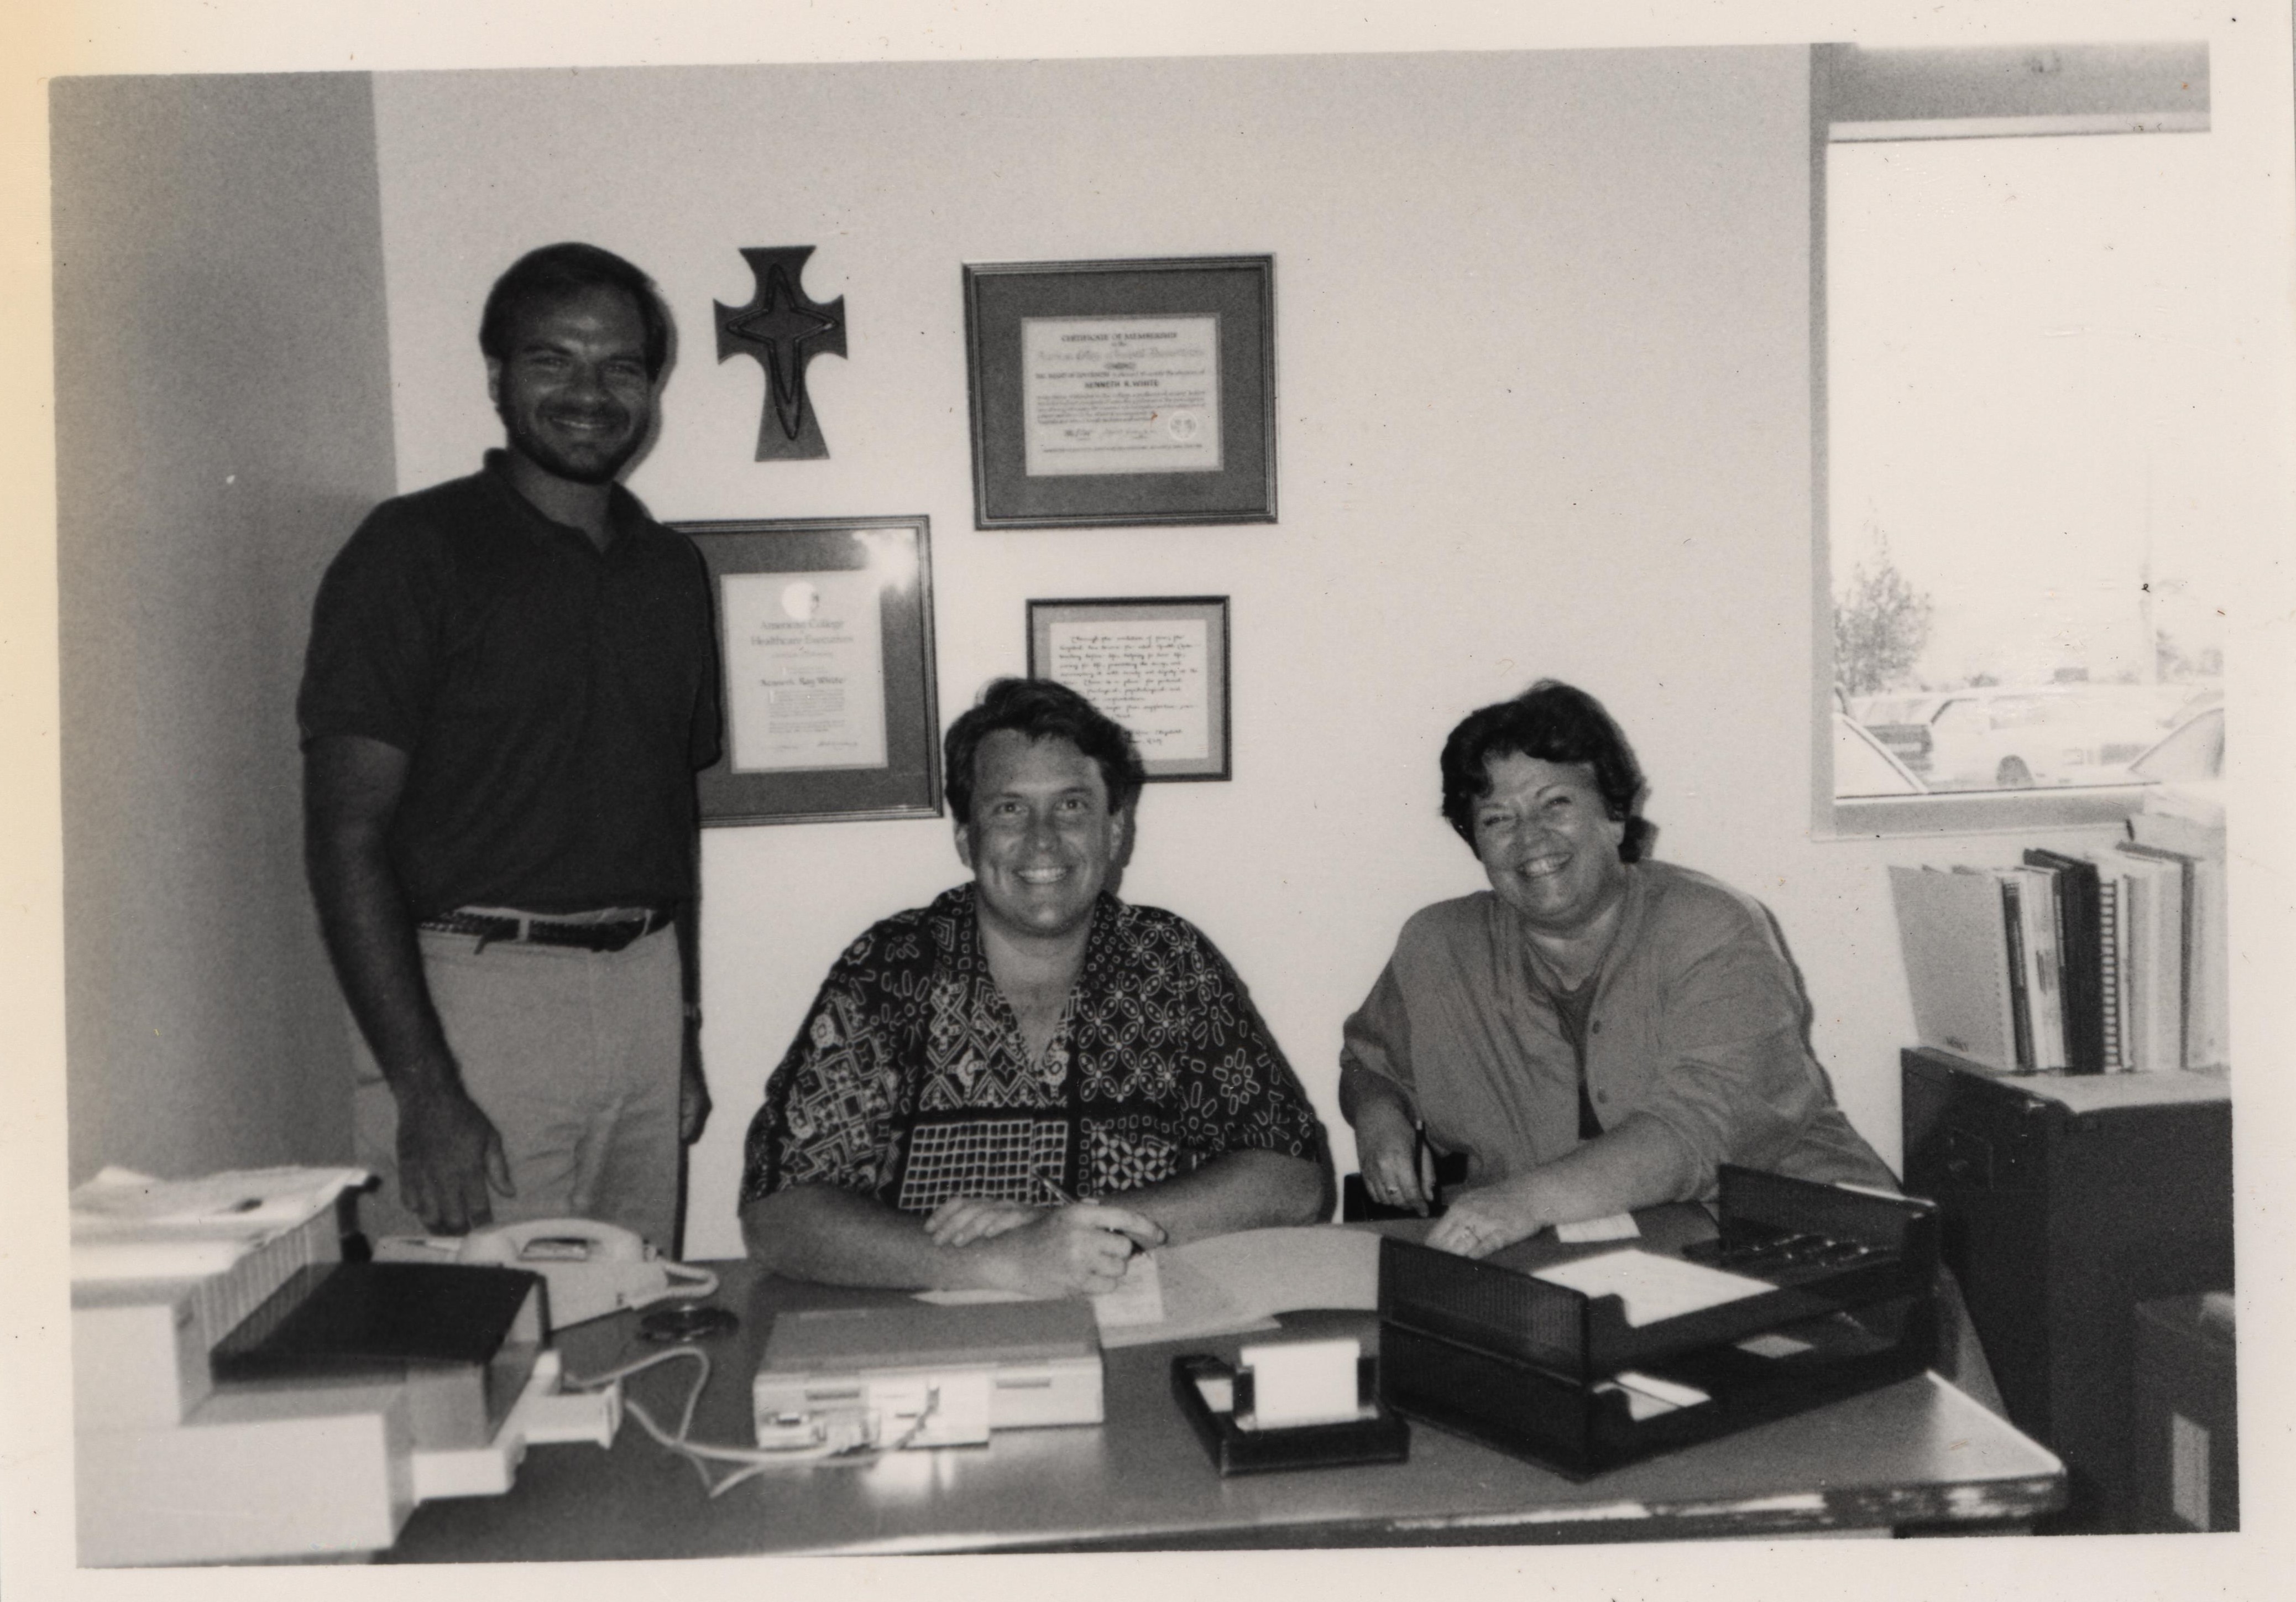 Ken White and the Guam Memorial Hospital project team in the 1980s